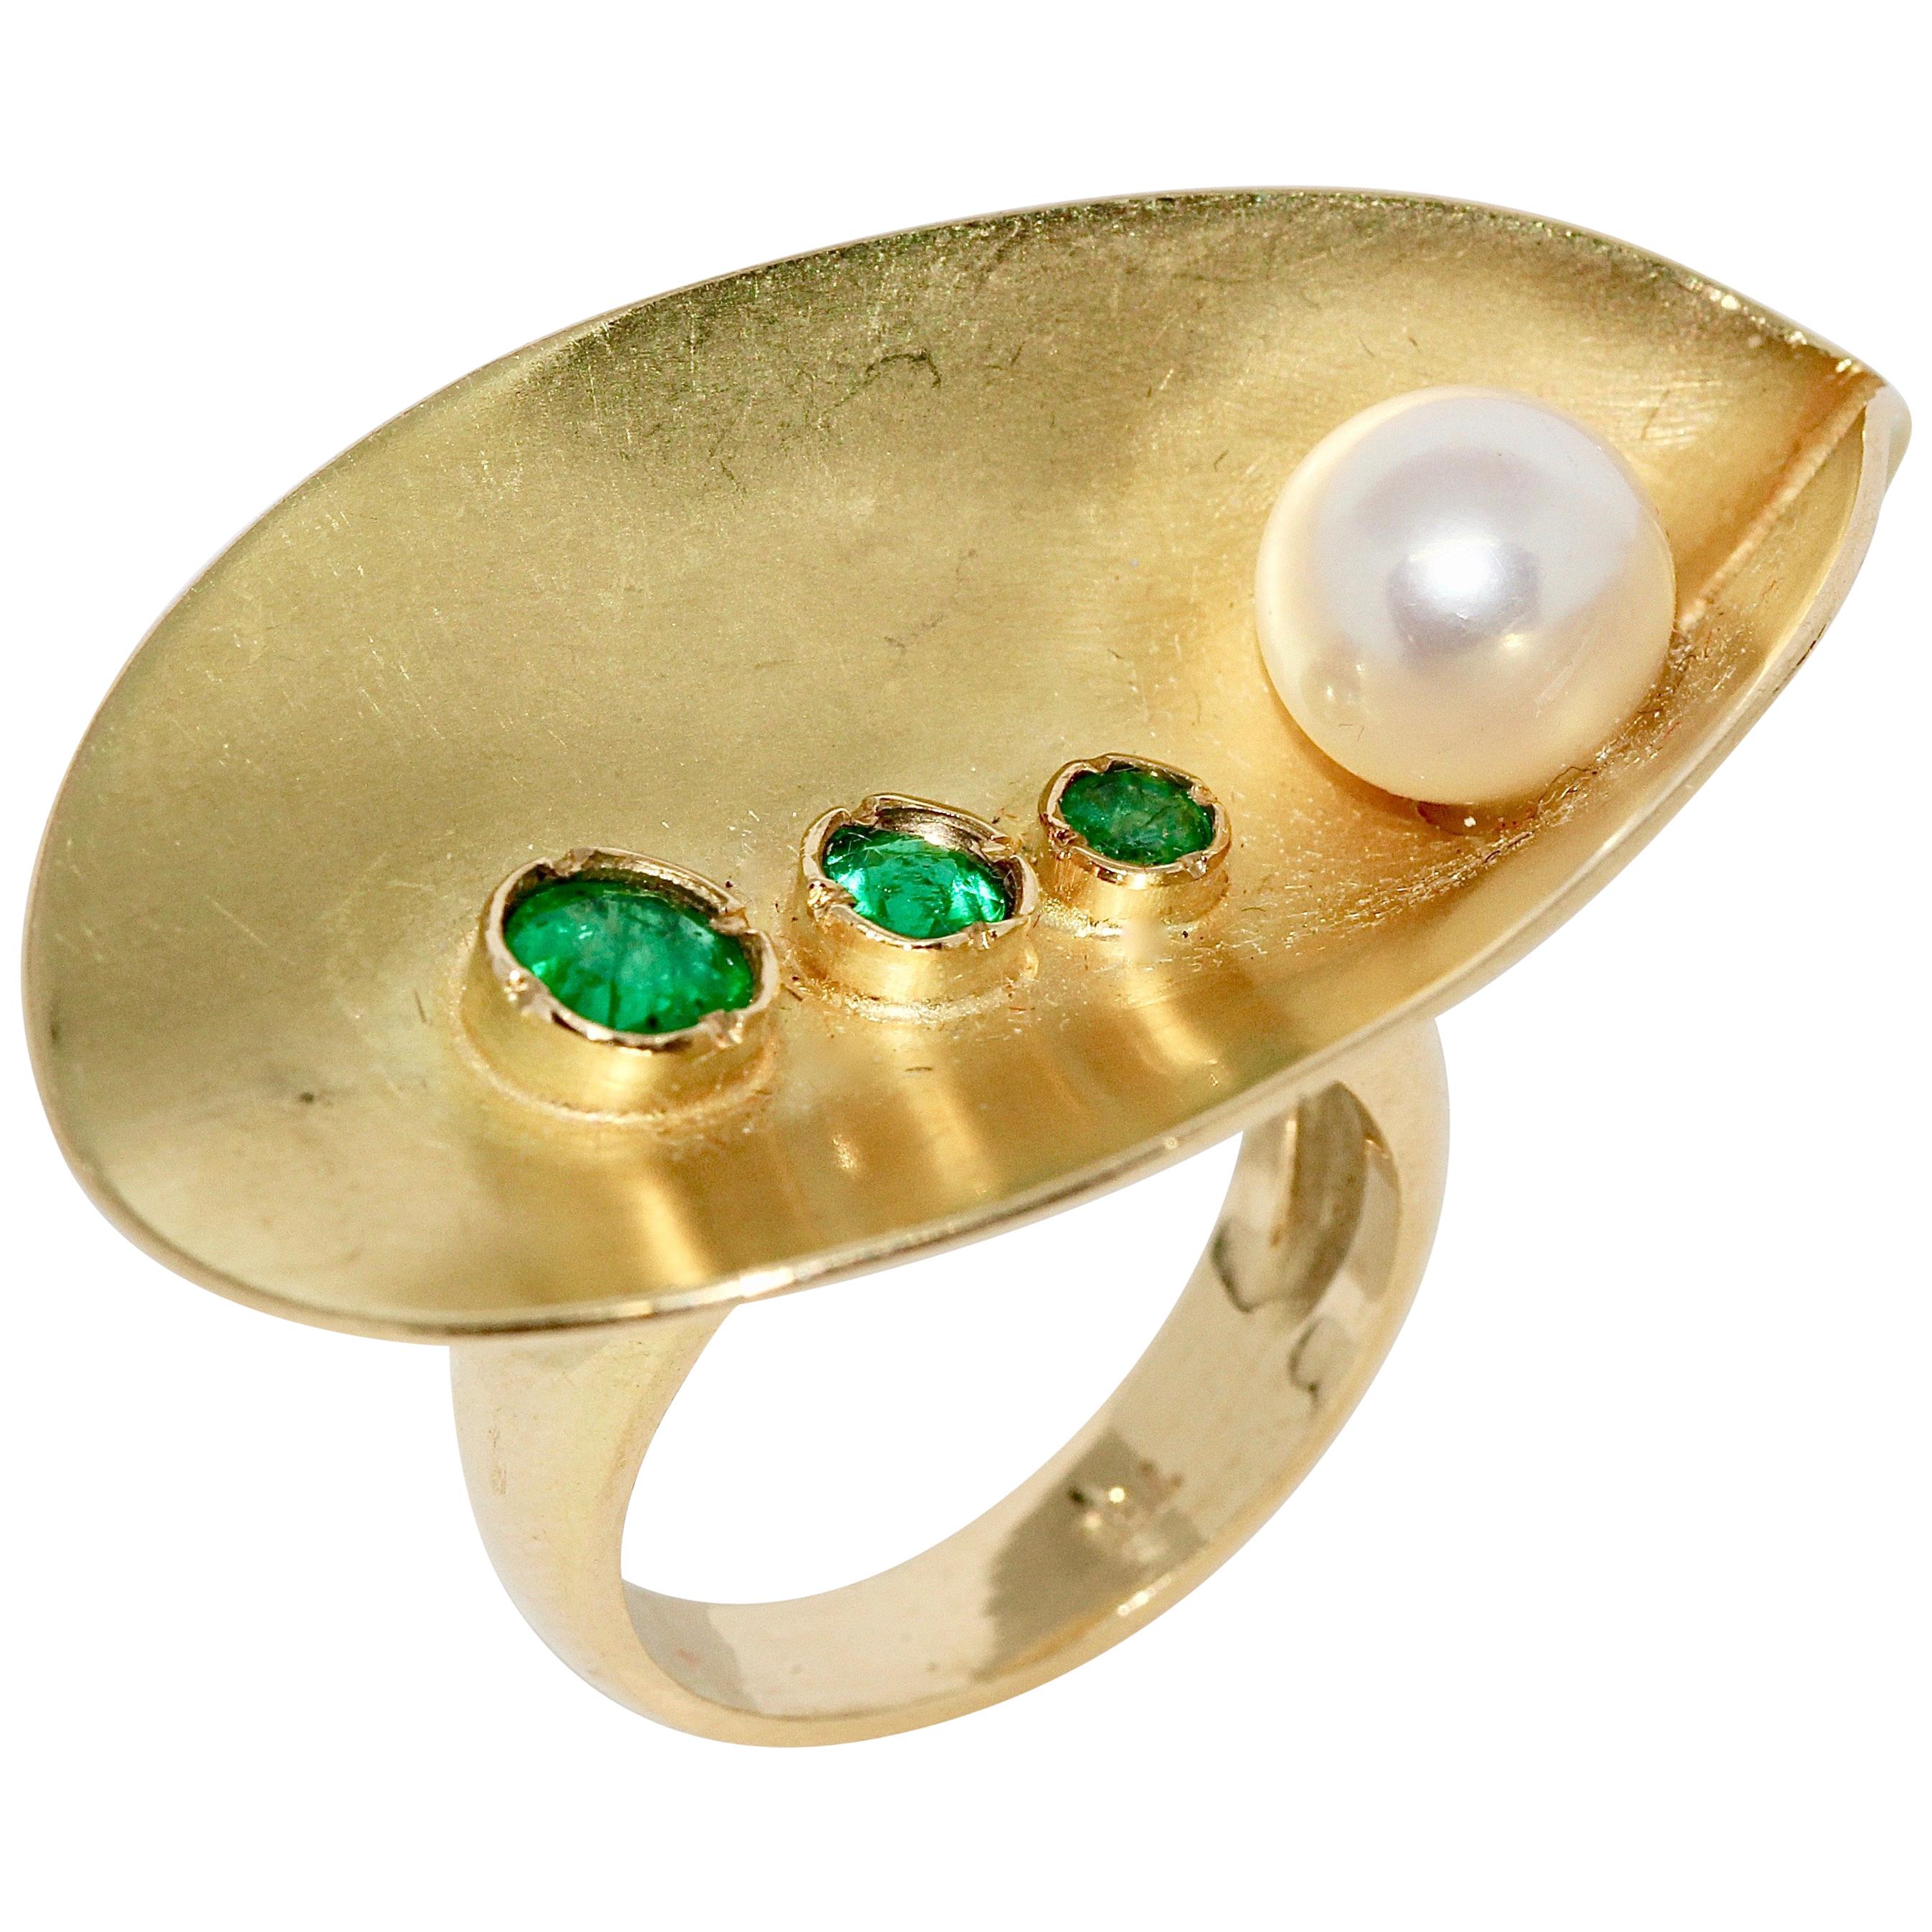 Designer Fashion Ring, 18 Karat Gold with Emeralds and Pearl For Sale